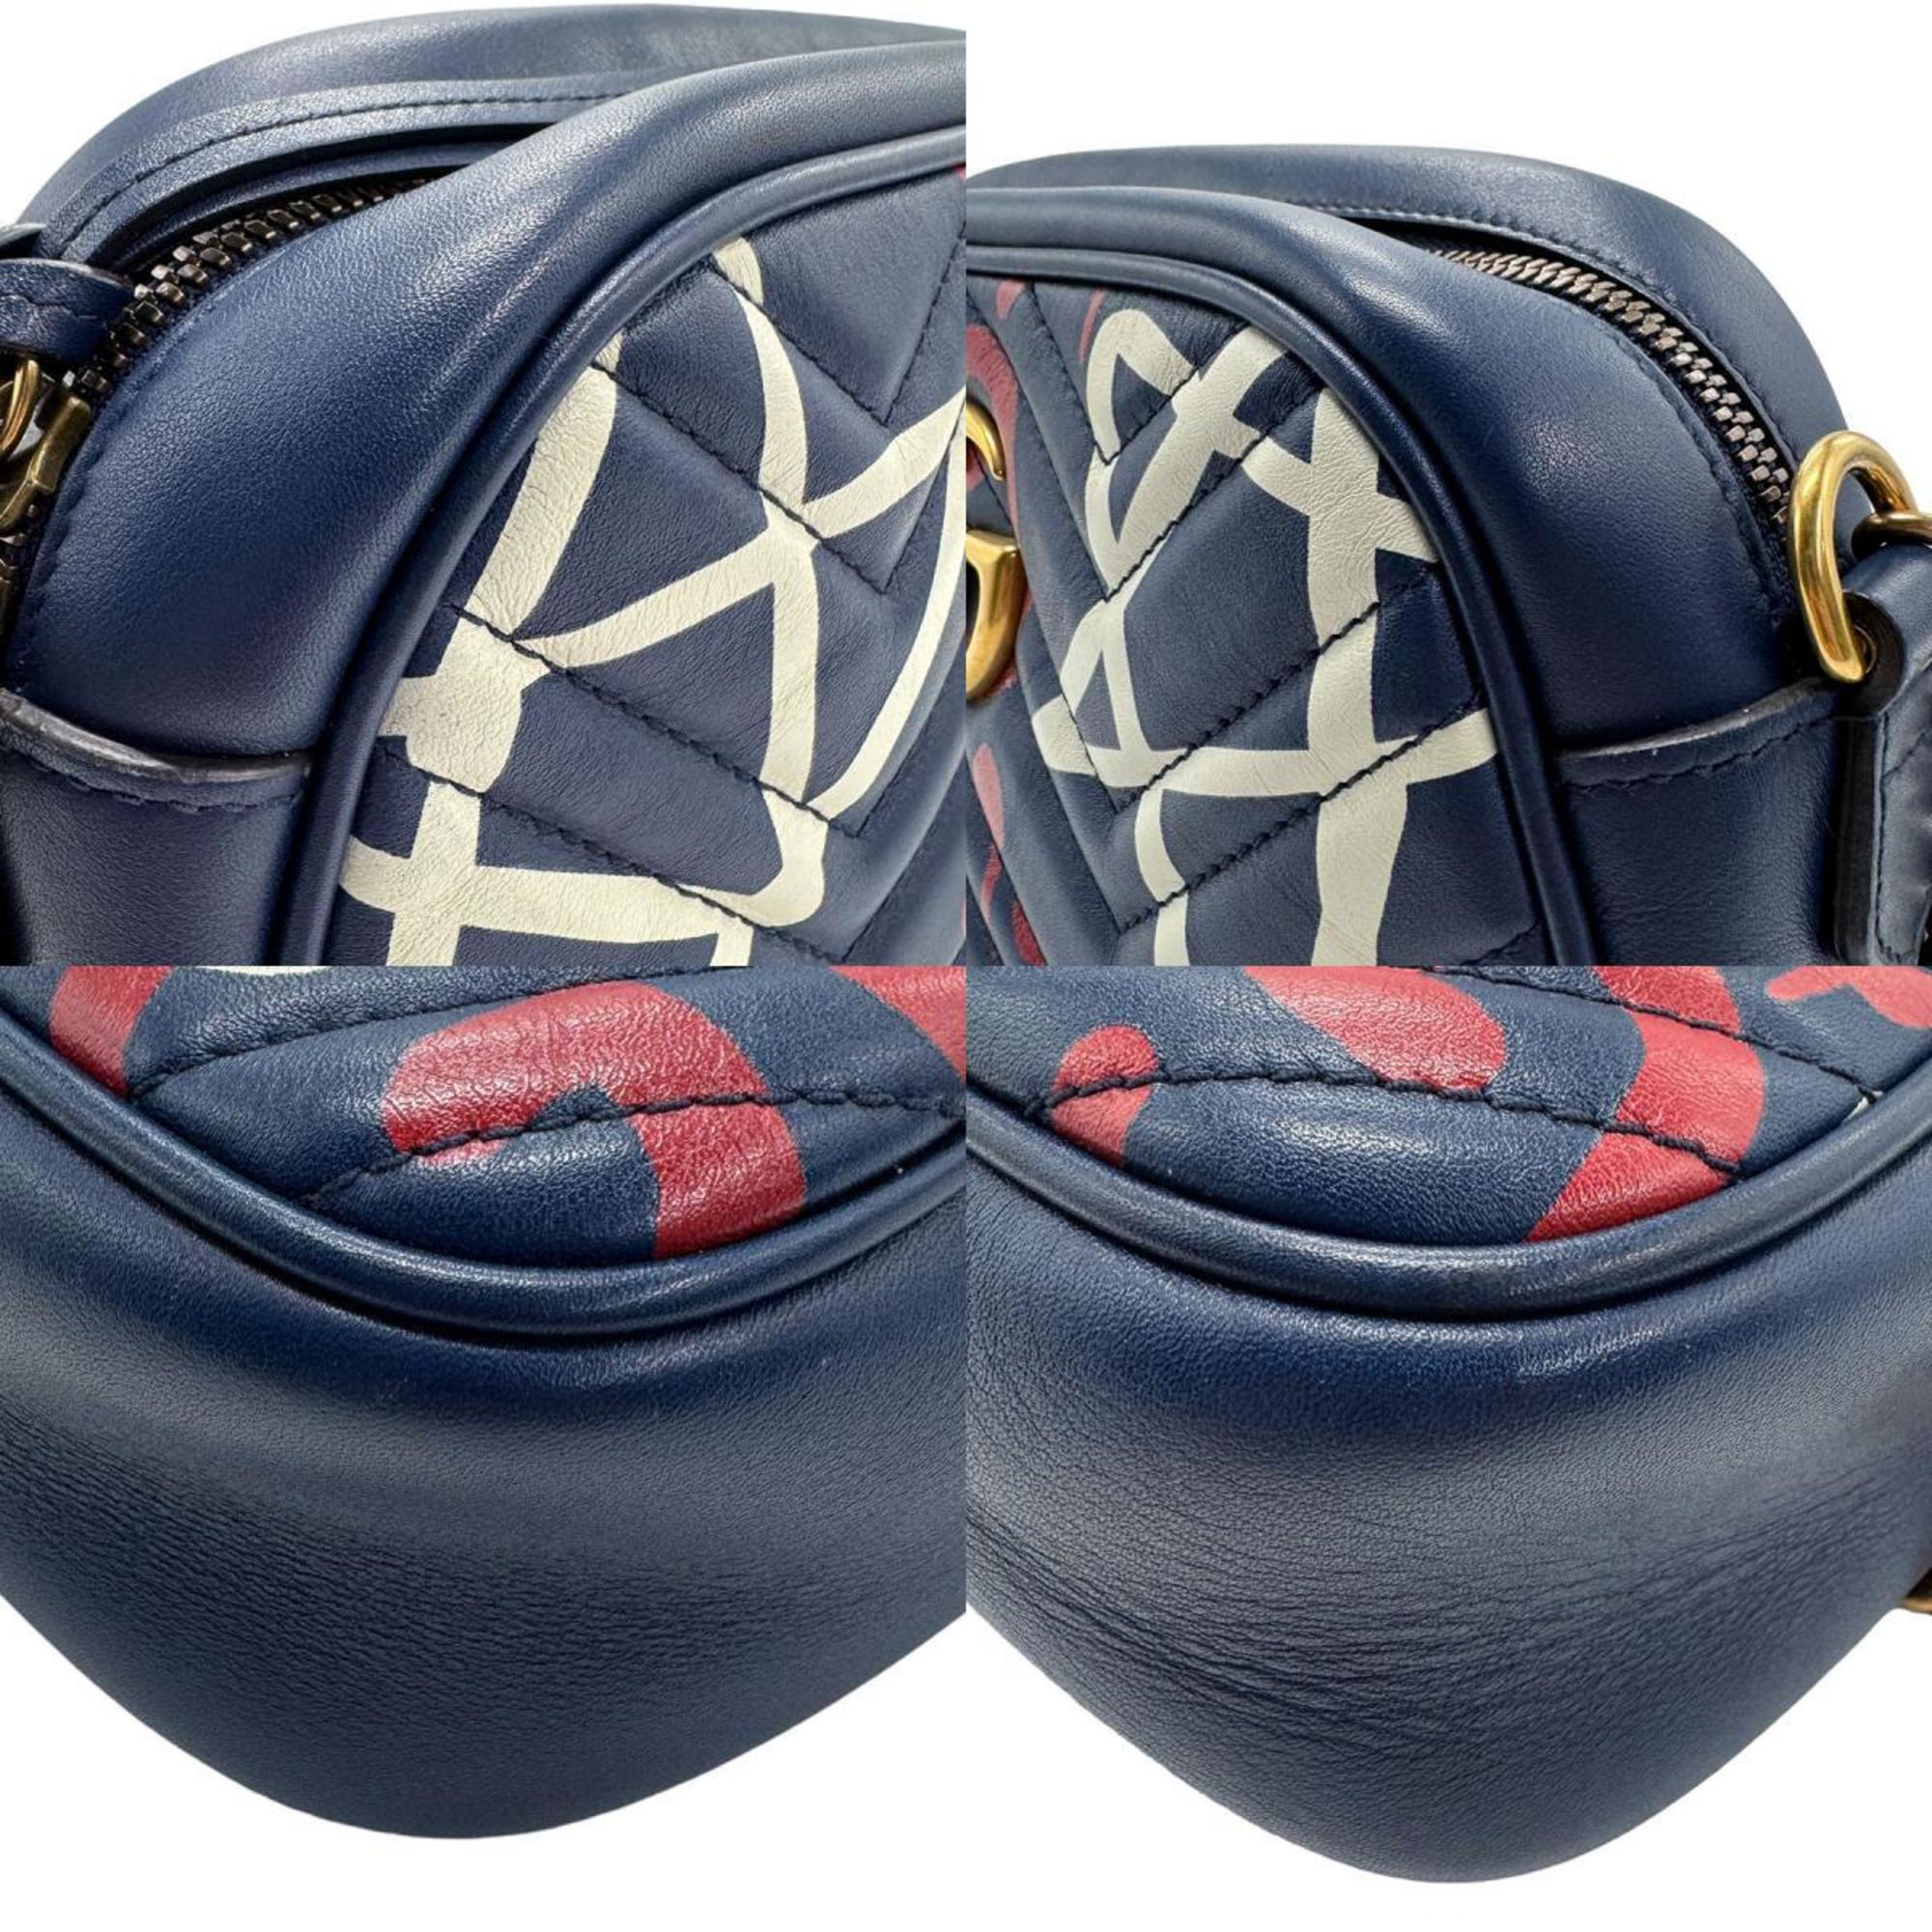 GUCCI Shoulder Bag GG Marmont Leather Navy Red White Gold Women's 447632 z1417